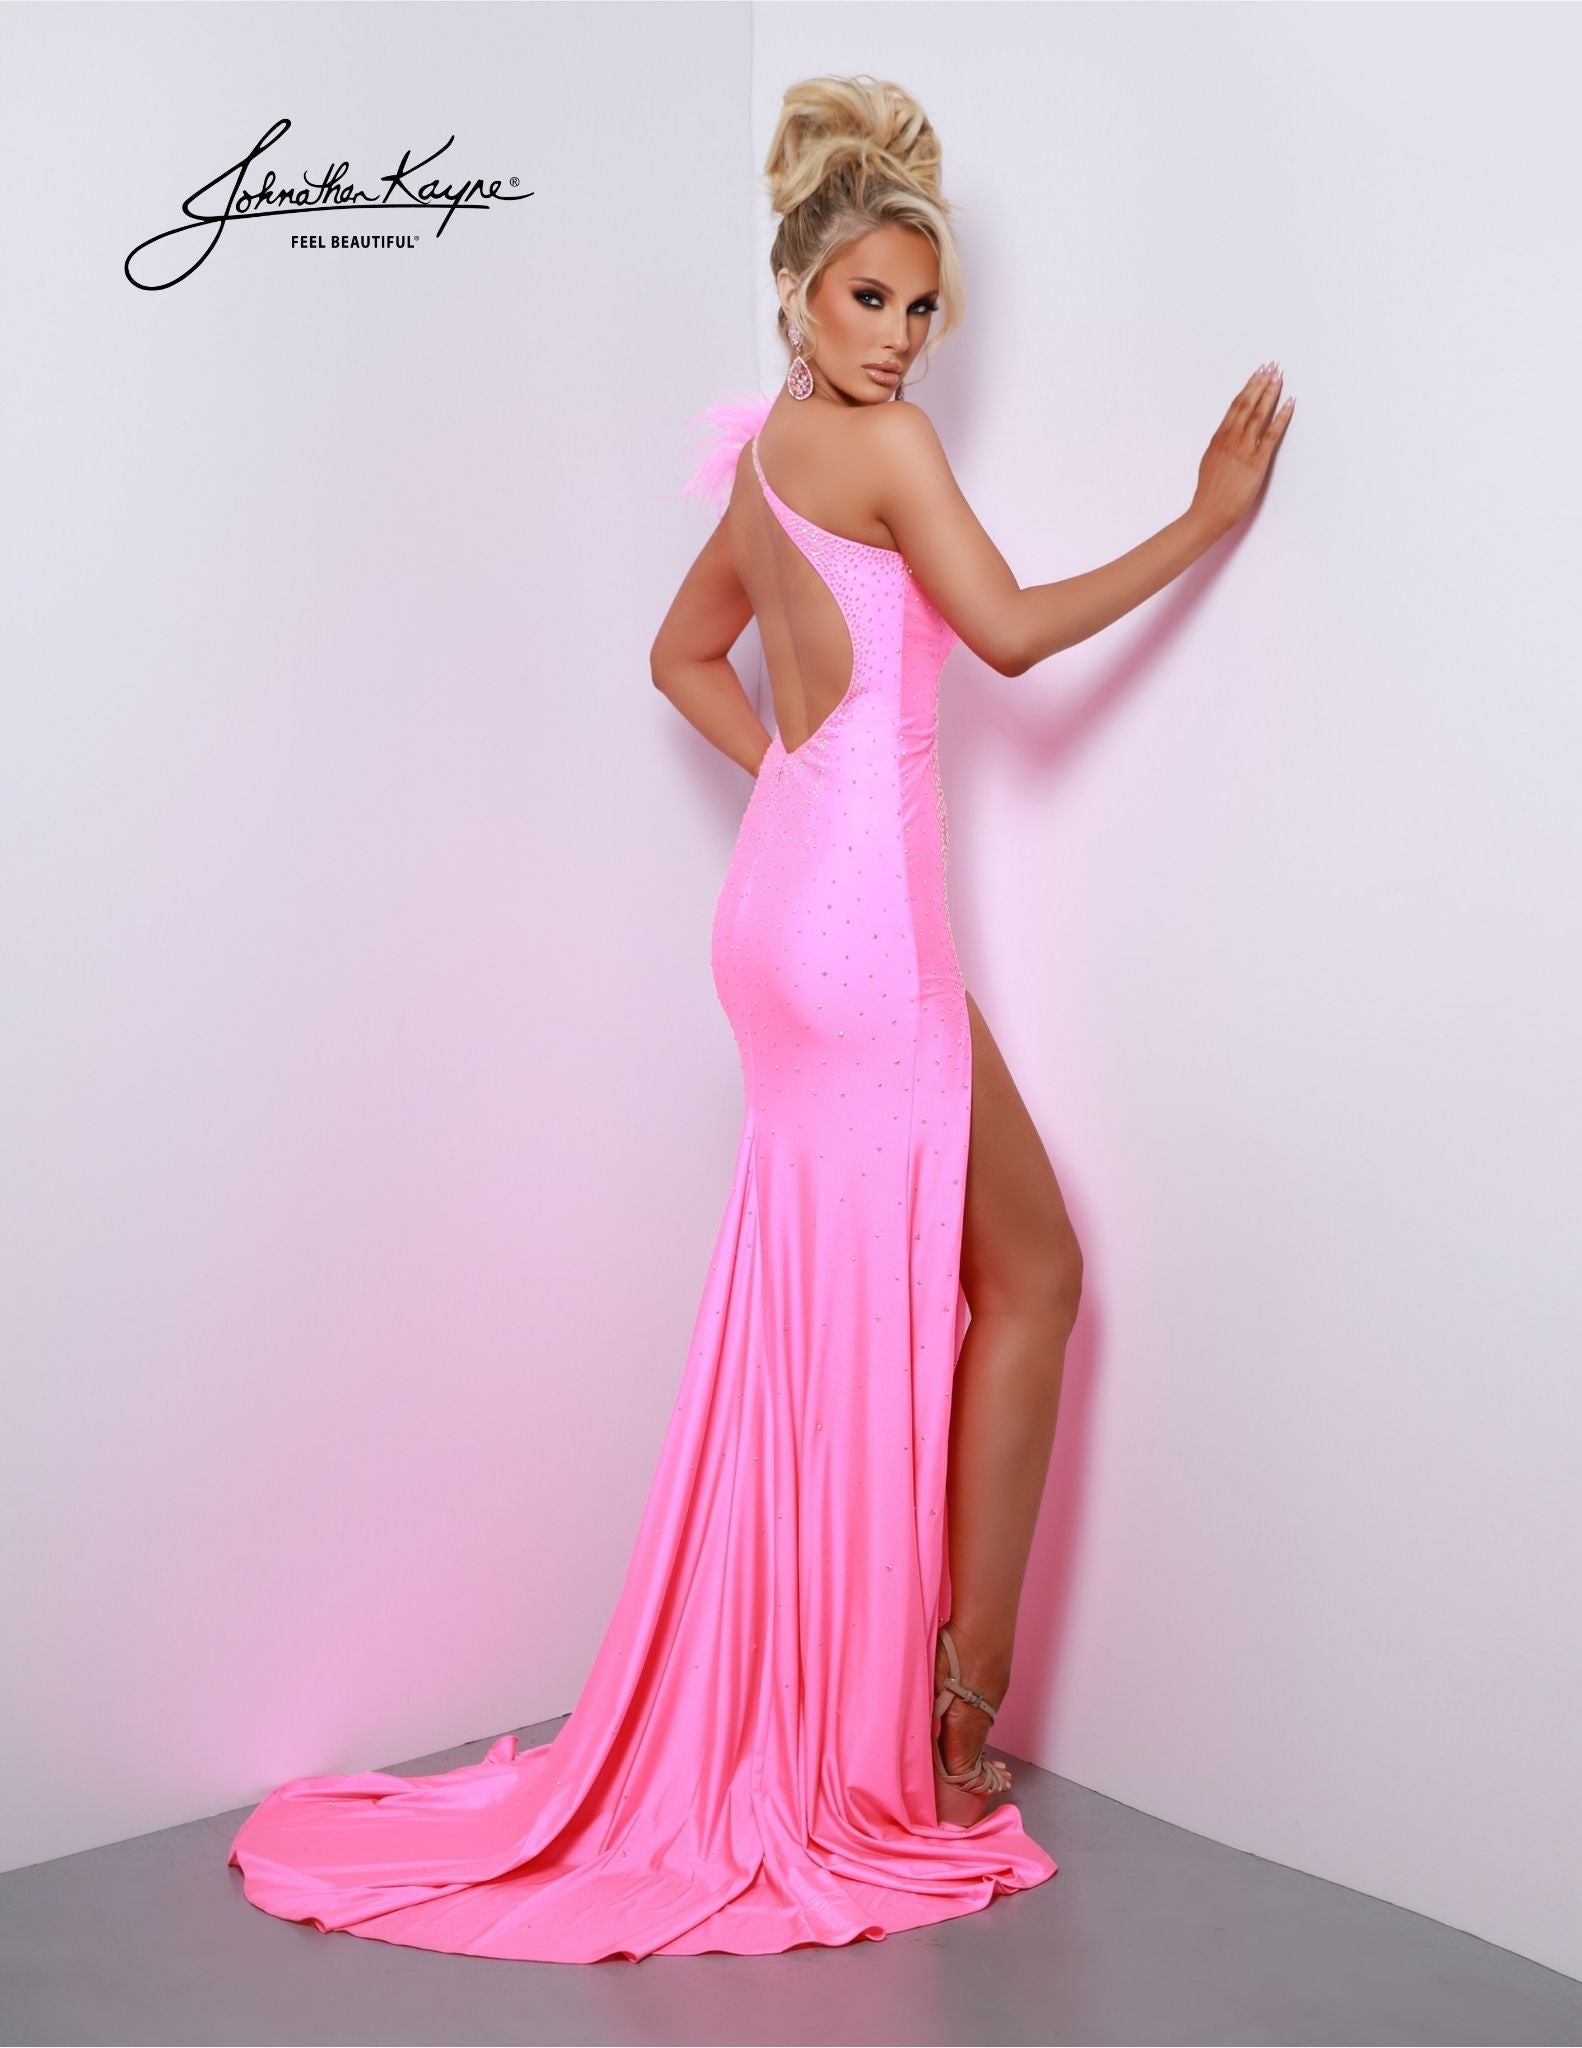 The Johnathan Kayne 2810 Long Prom Dress exudes elegance with its fitted one-shoulder style, intricate feathered accents, and dramatic maxi slit. Stylish and sophisticated, this formal gown is sure to make a lasting impression. Let your inner diva shine bright in this 4 Way Stretch Lycra gown. This dress will ensure that all eyes are on you as you make a grand entrance.